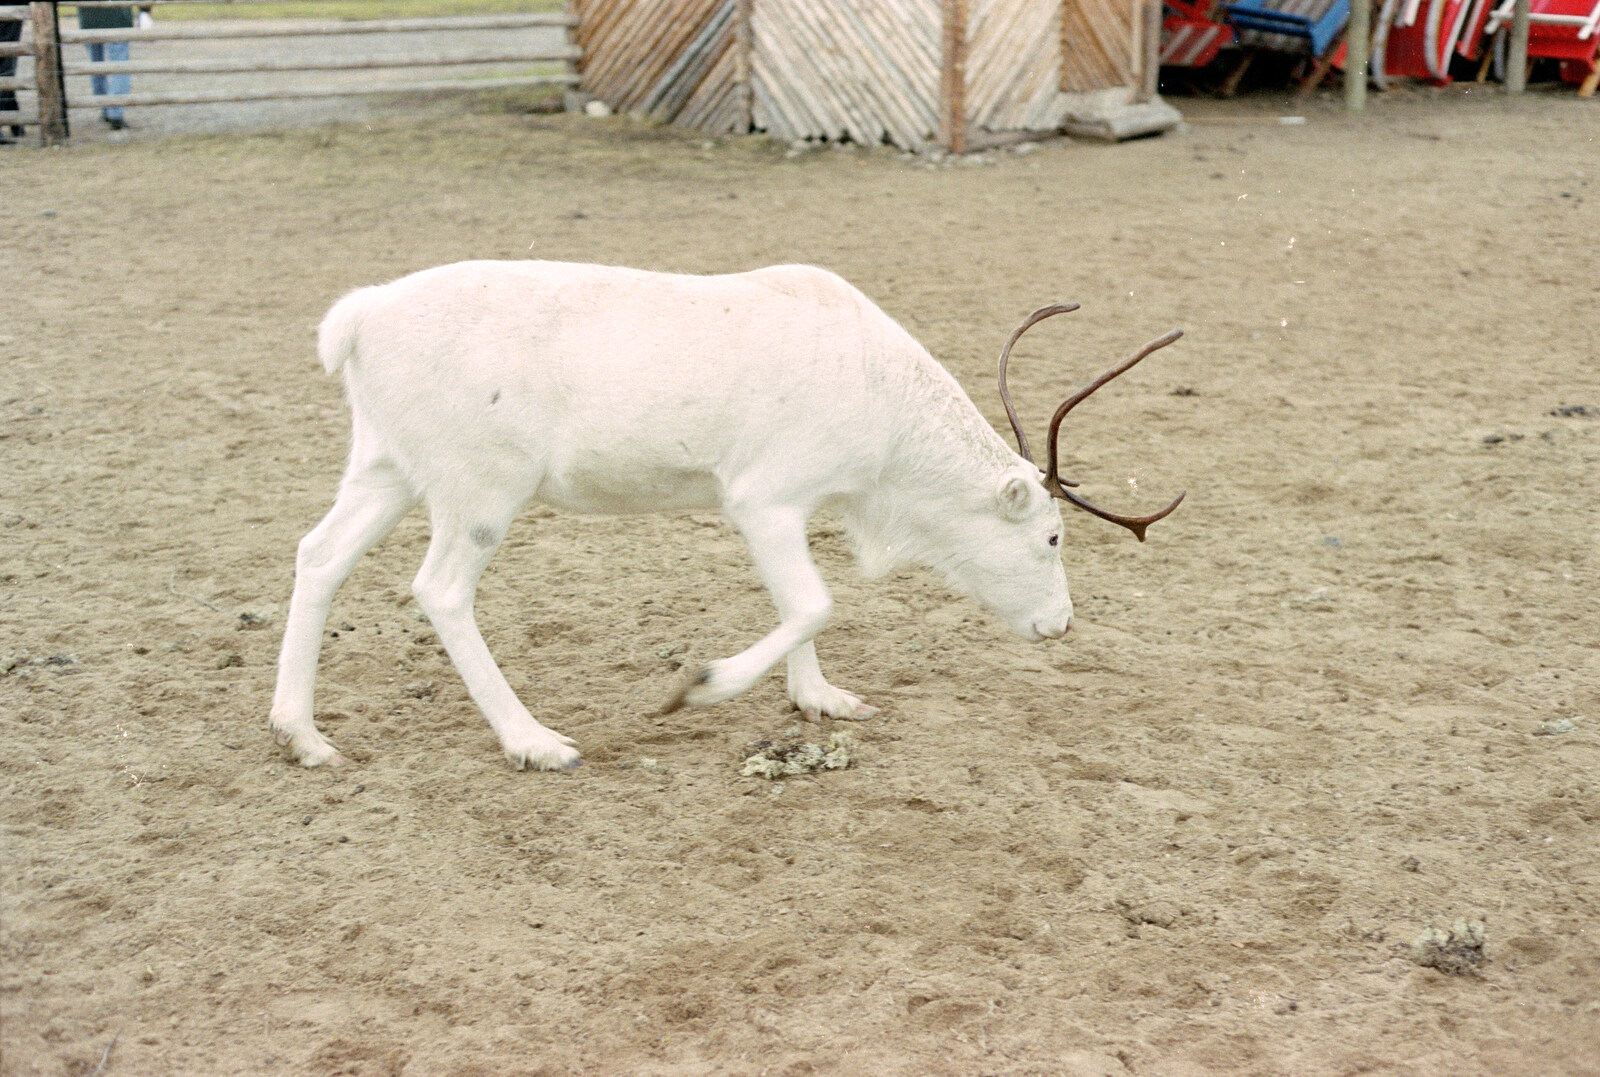 An Albino reindeer from A Trip to Rovaniemi and the Arctic Circle, Lapland, Finland - 28th November 1999